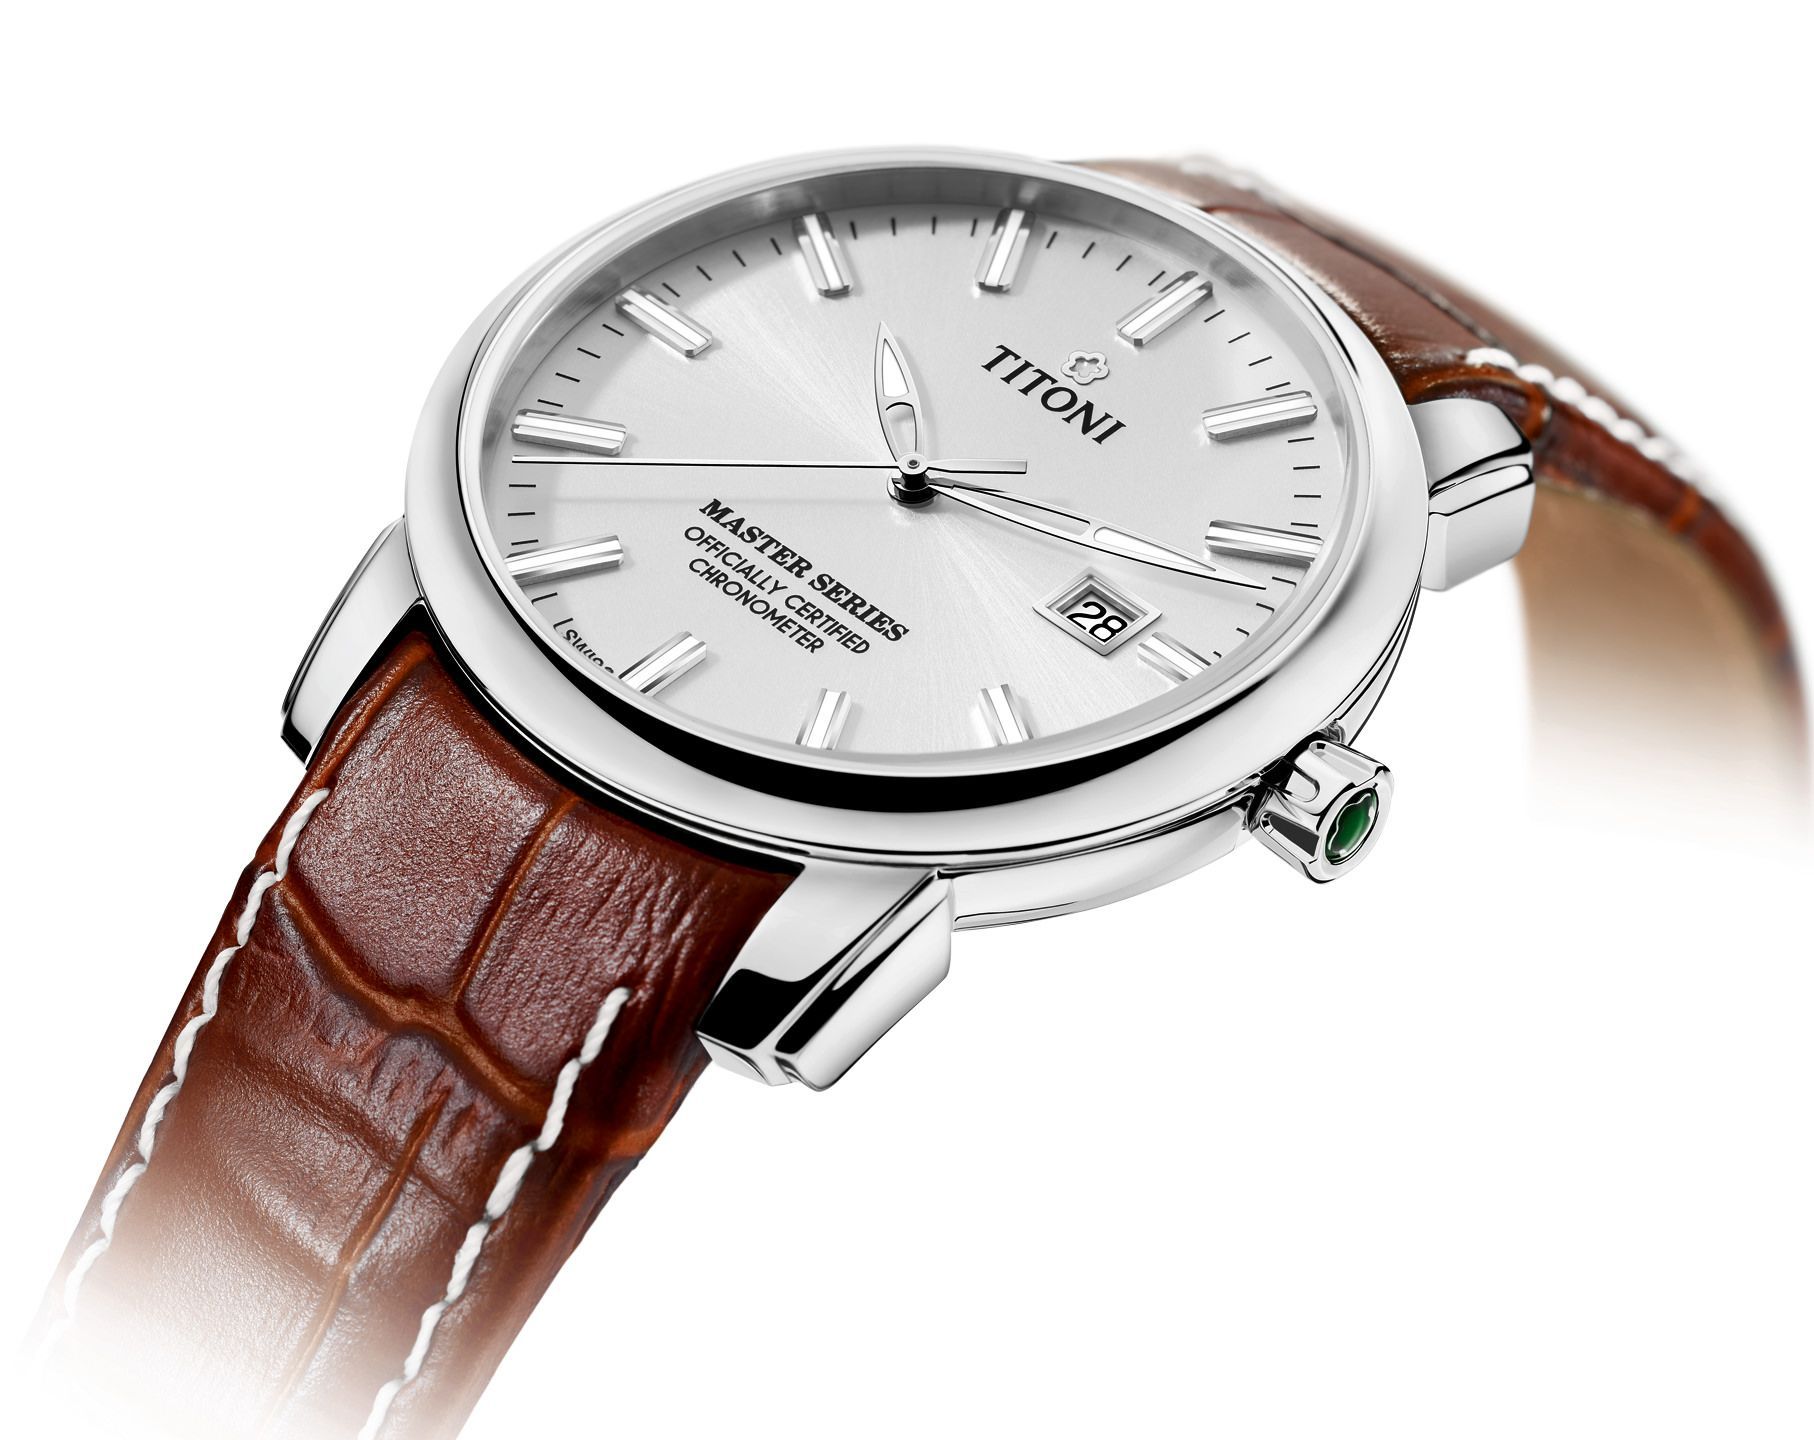 Titoni  41 mm Watch in Silver Dial For Men - 2